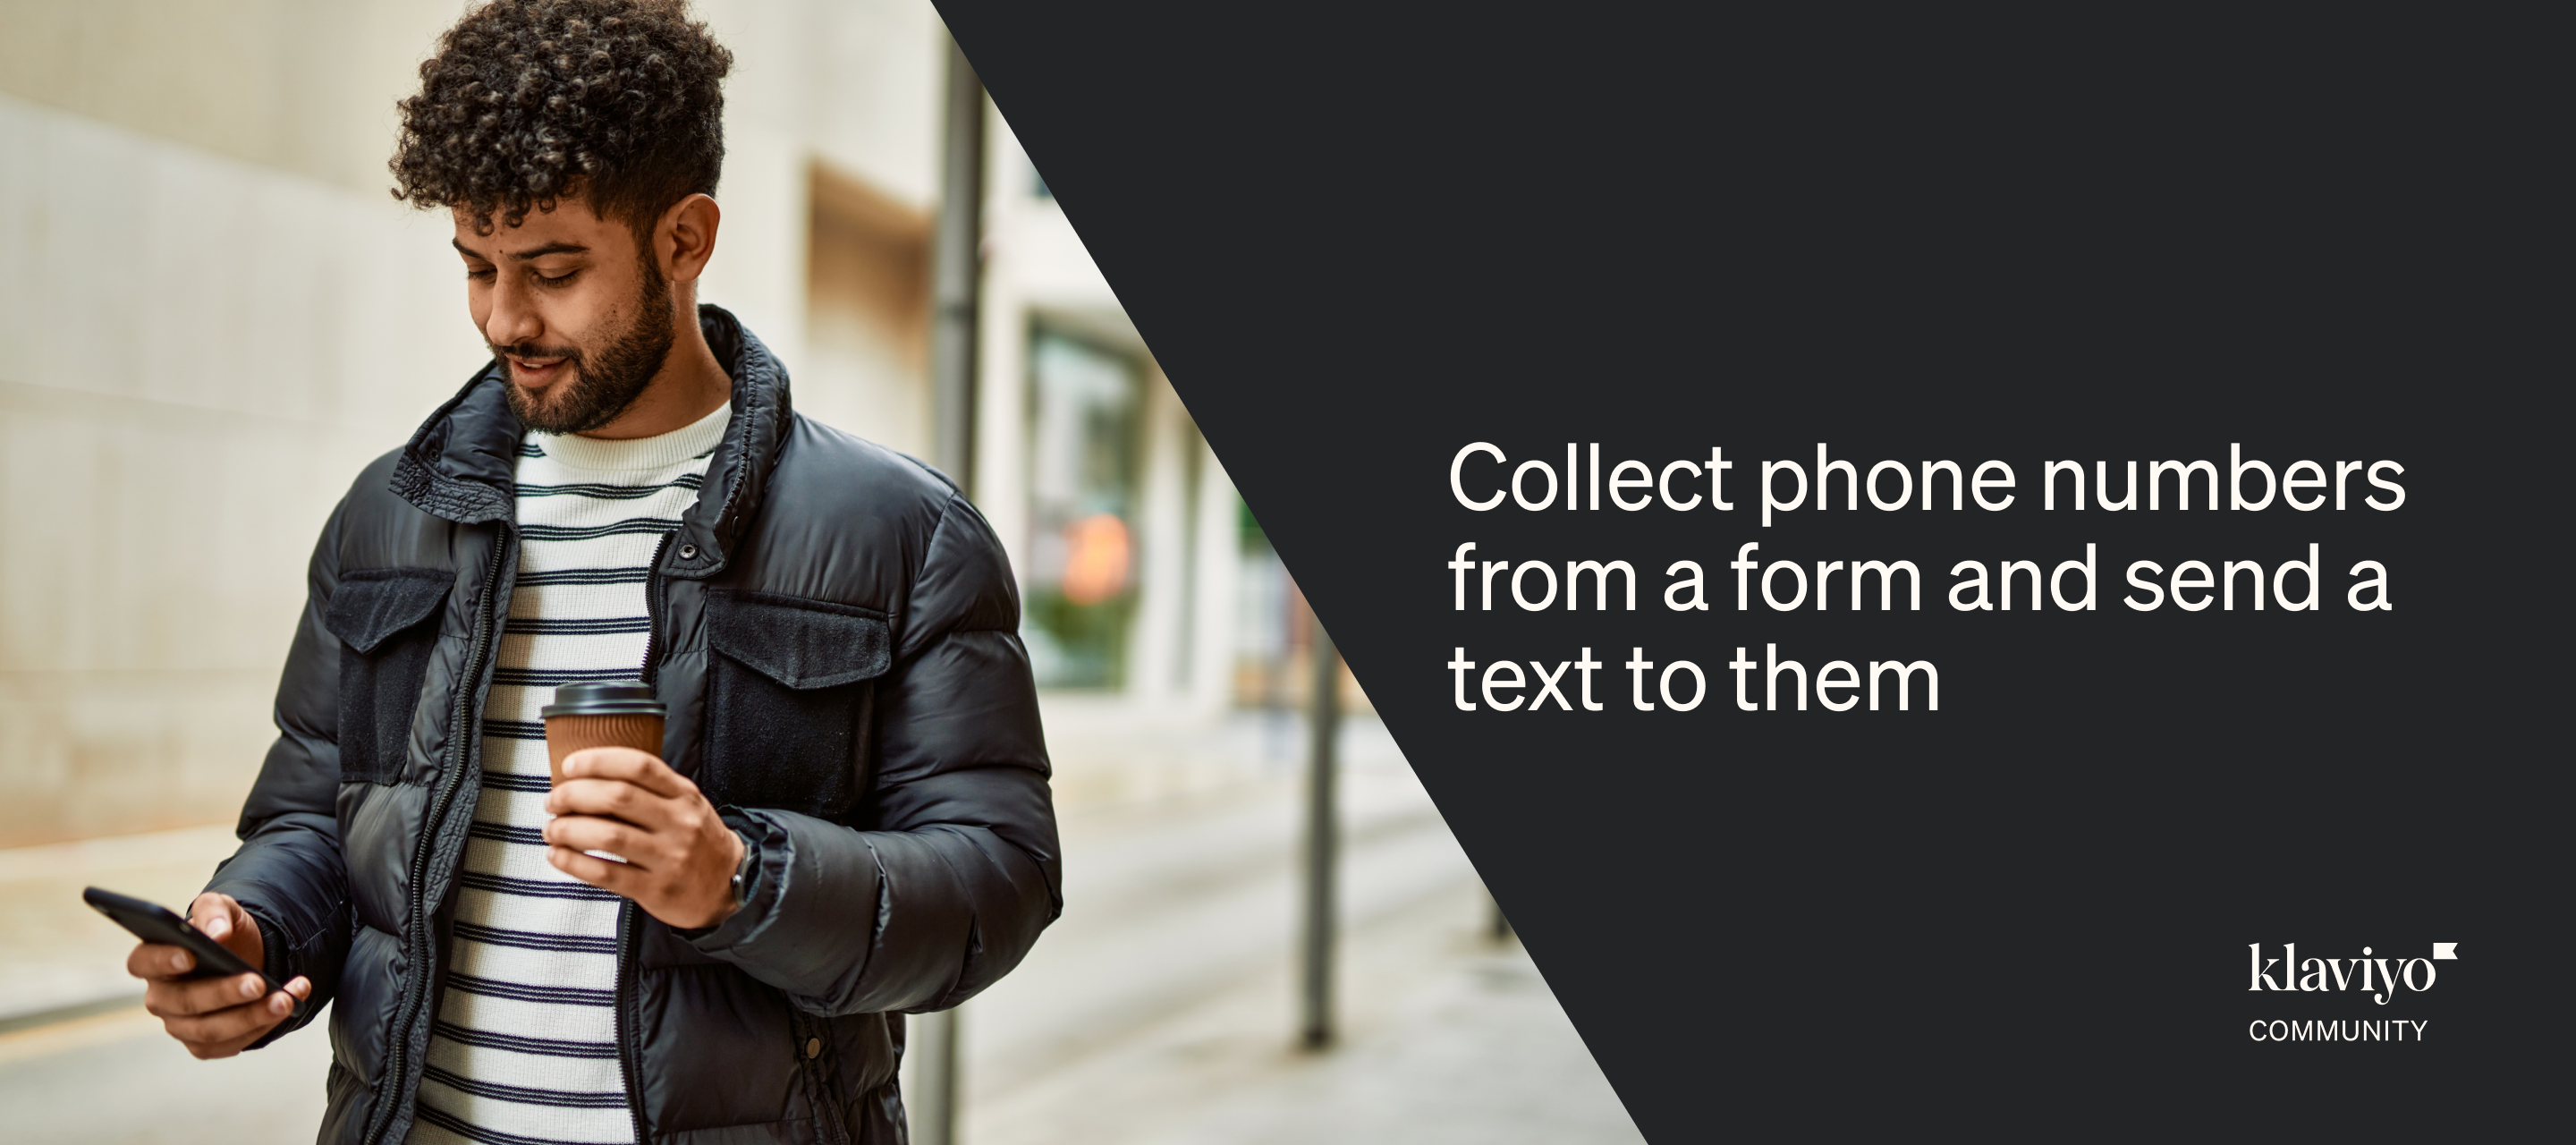 Collect phone numbers from a form and send a text to them